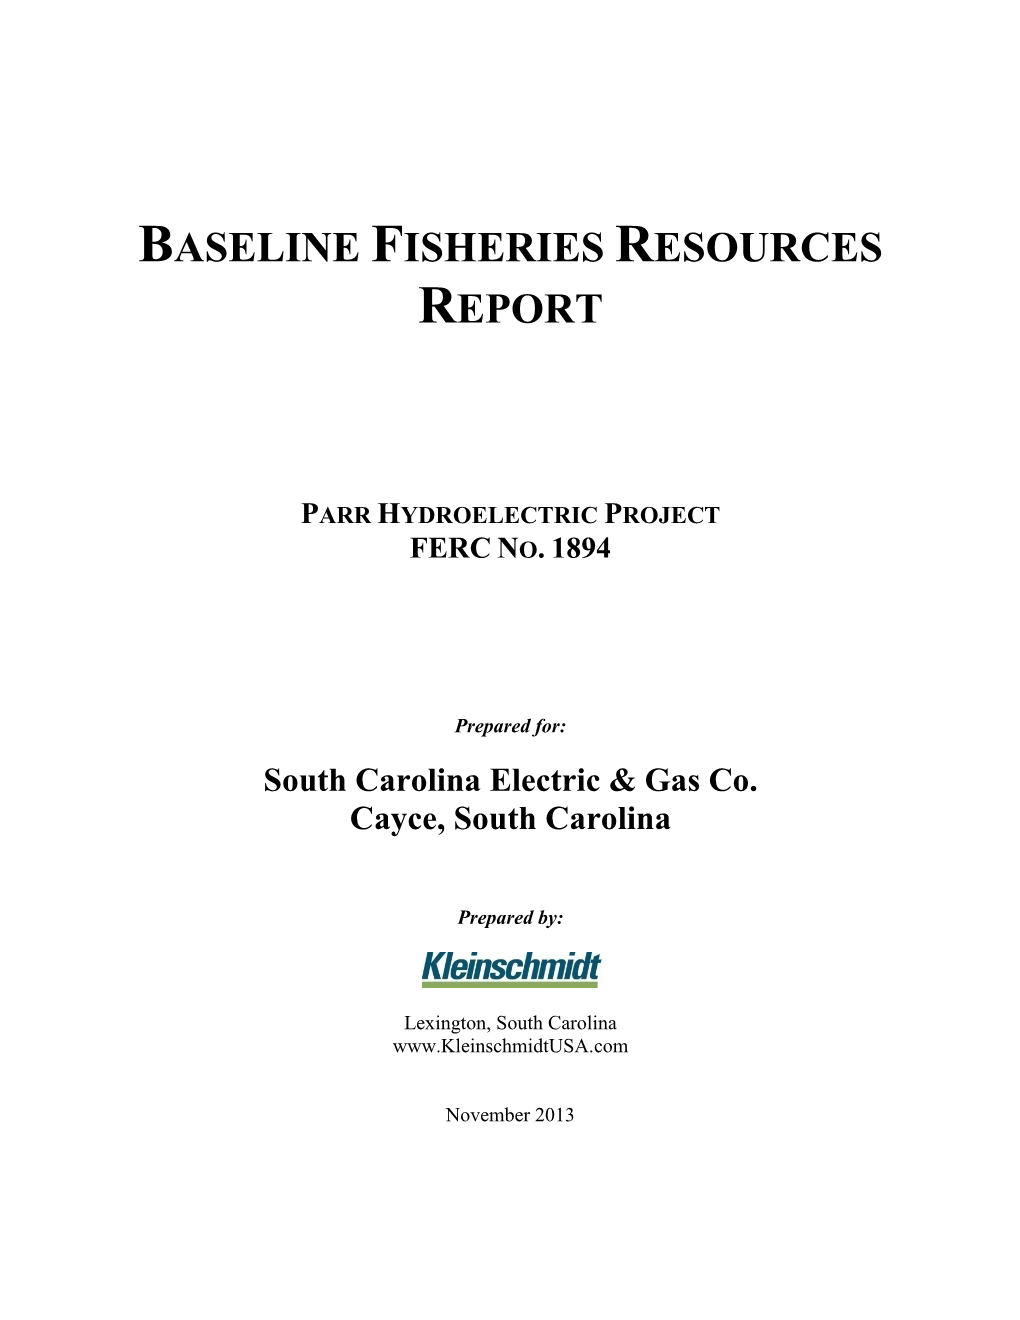 Baseline Fisheries Resources Report